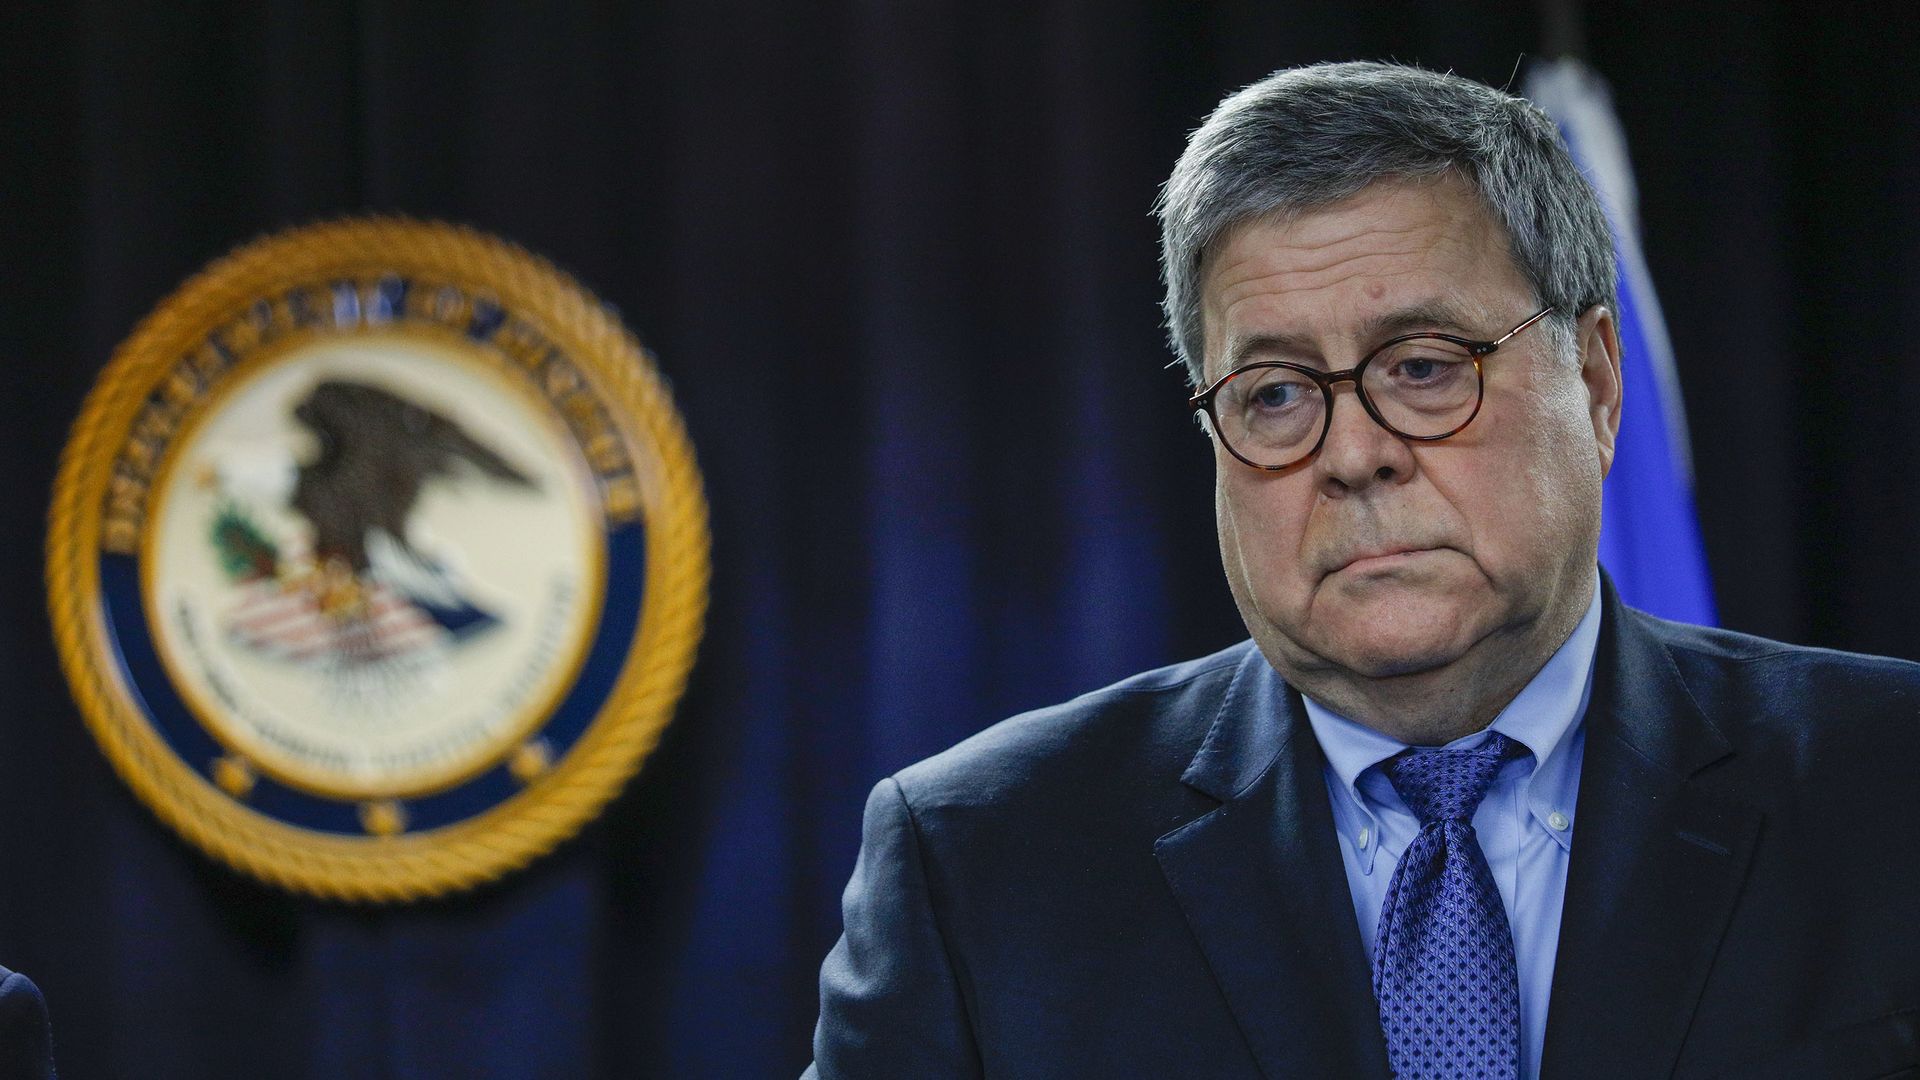 Attorney General William Barr waits to speak at an announcement a new Crime Reduction Initiative designed to reduce crime in Detroit on December 18